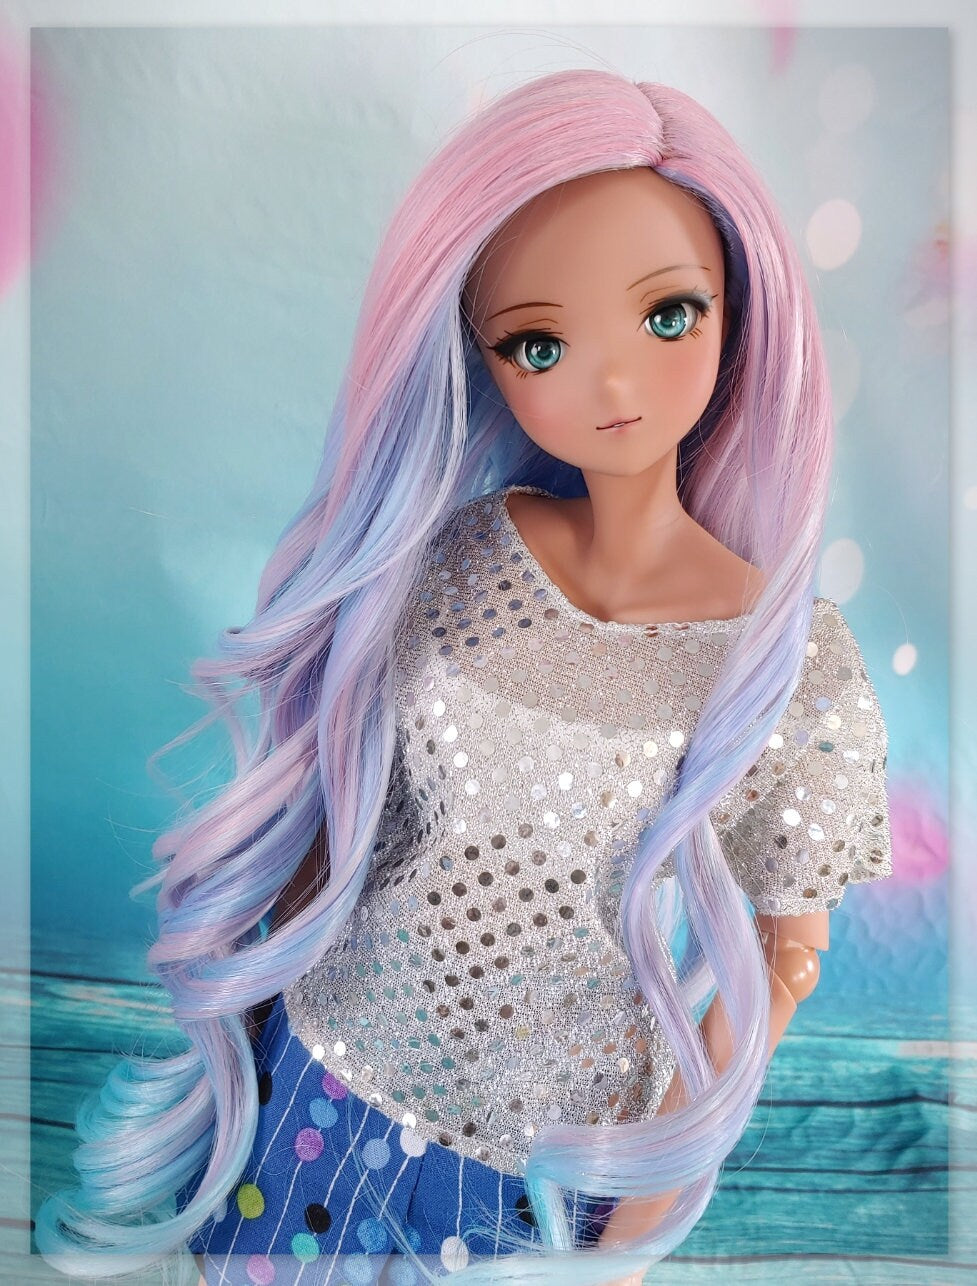 Custom doll WIG for Smart Dolls- Heat Safe - Tangle Resistant- 8.5" head size of Bjd, SD, Dollfie Dream dolls Unicorn Dyed Ombre